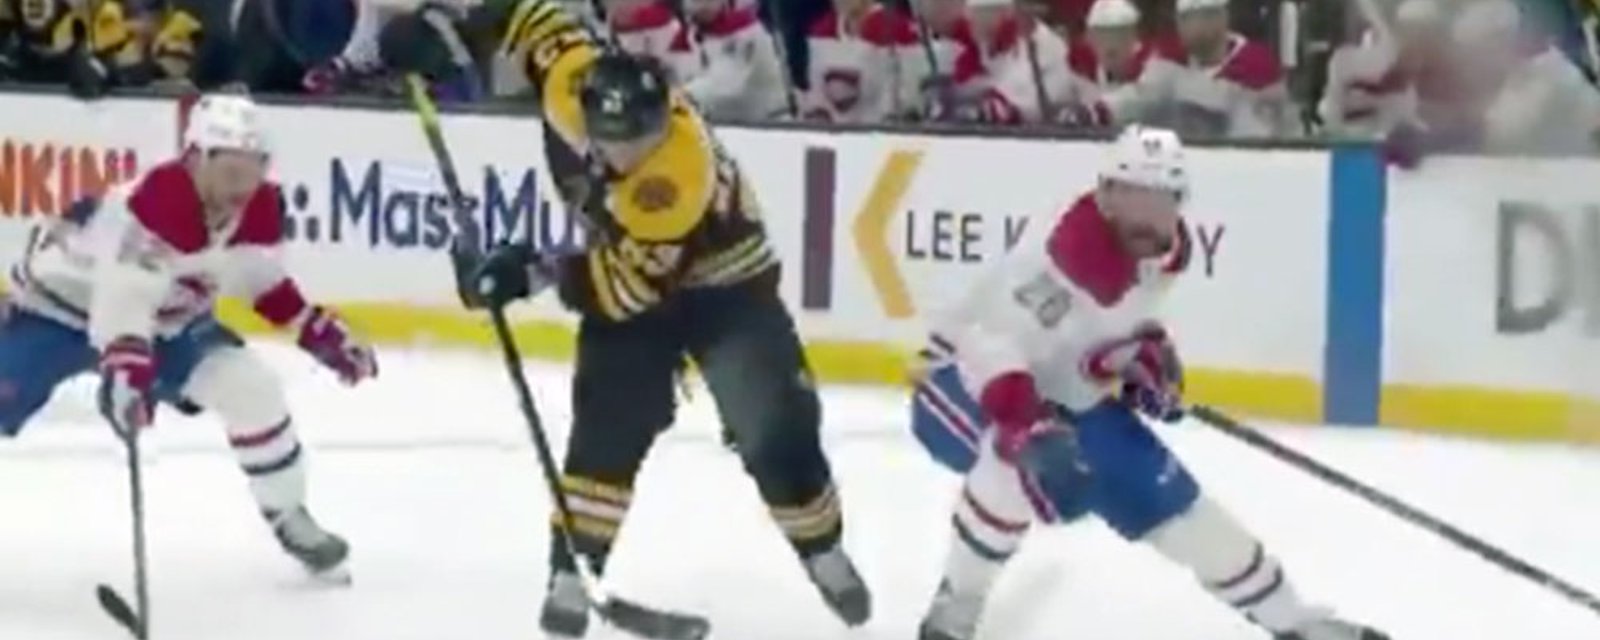 Marchand dangles through the legs and then dishes to Pastrnak for the pass of the year